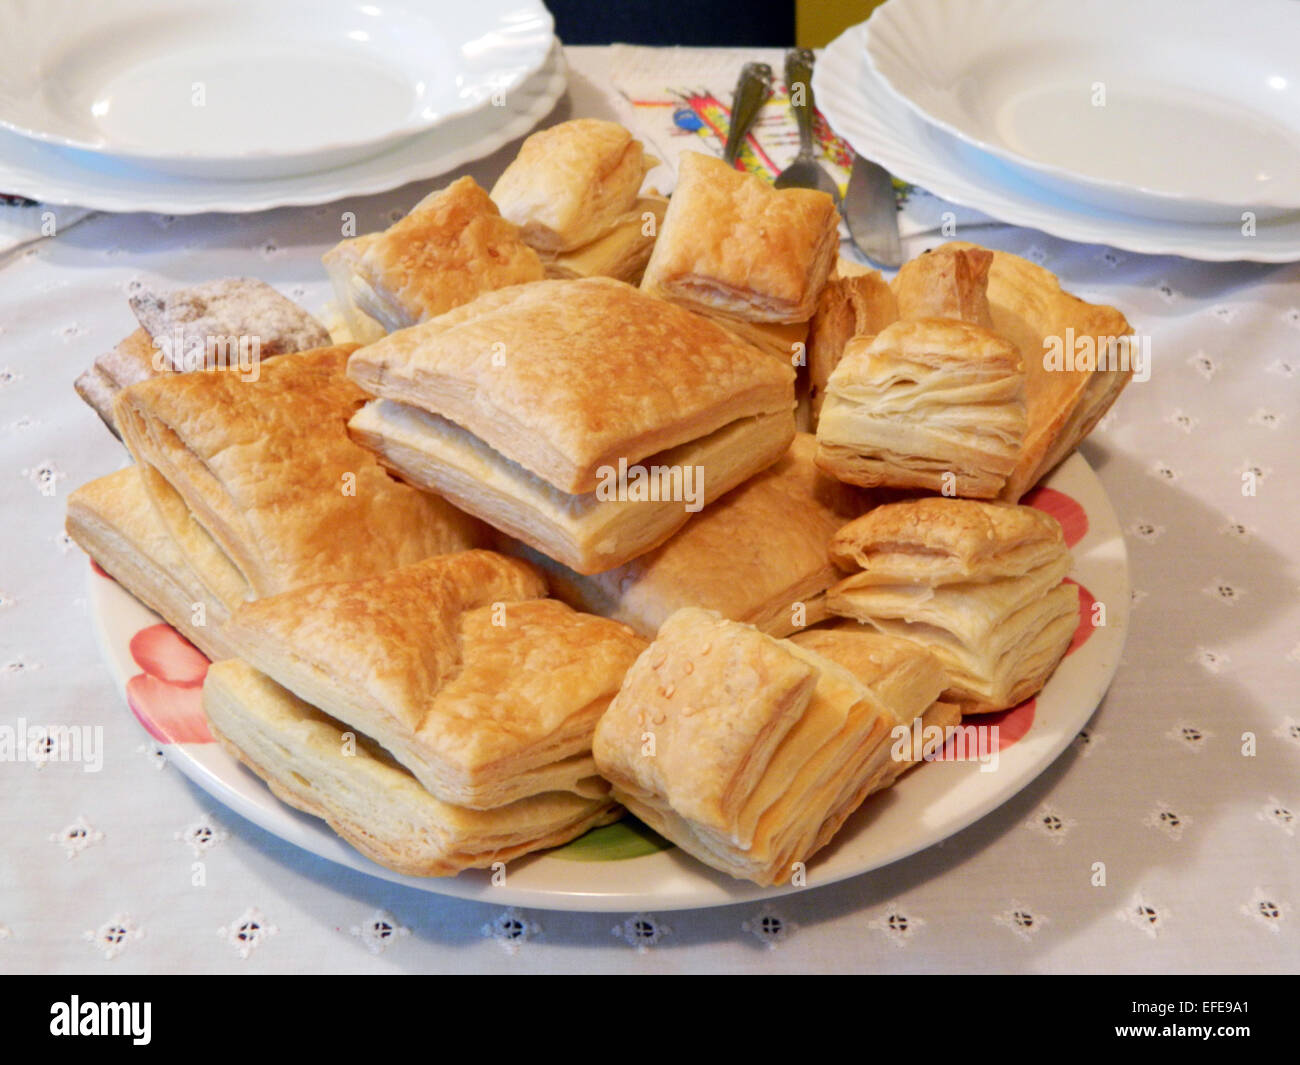 Homemade pate type zu zu which are served on the table as an appetizer. Stock Photo